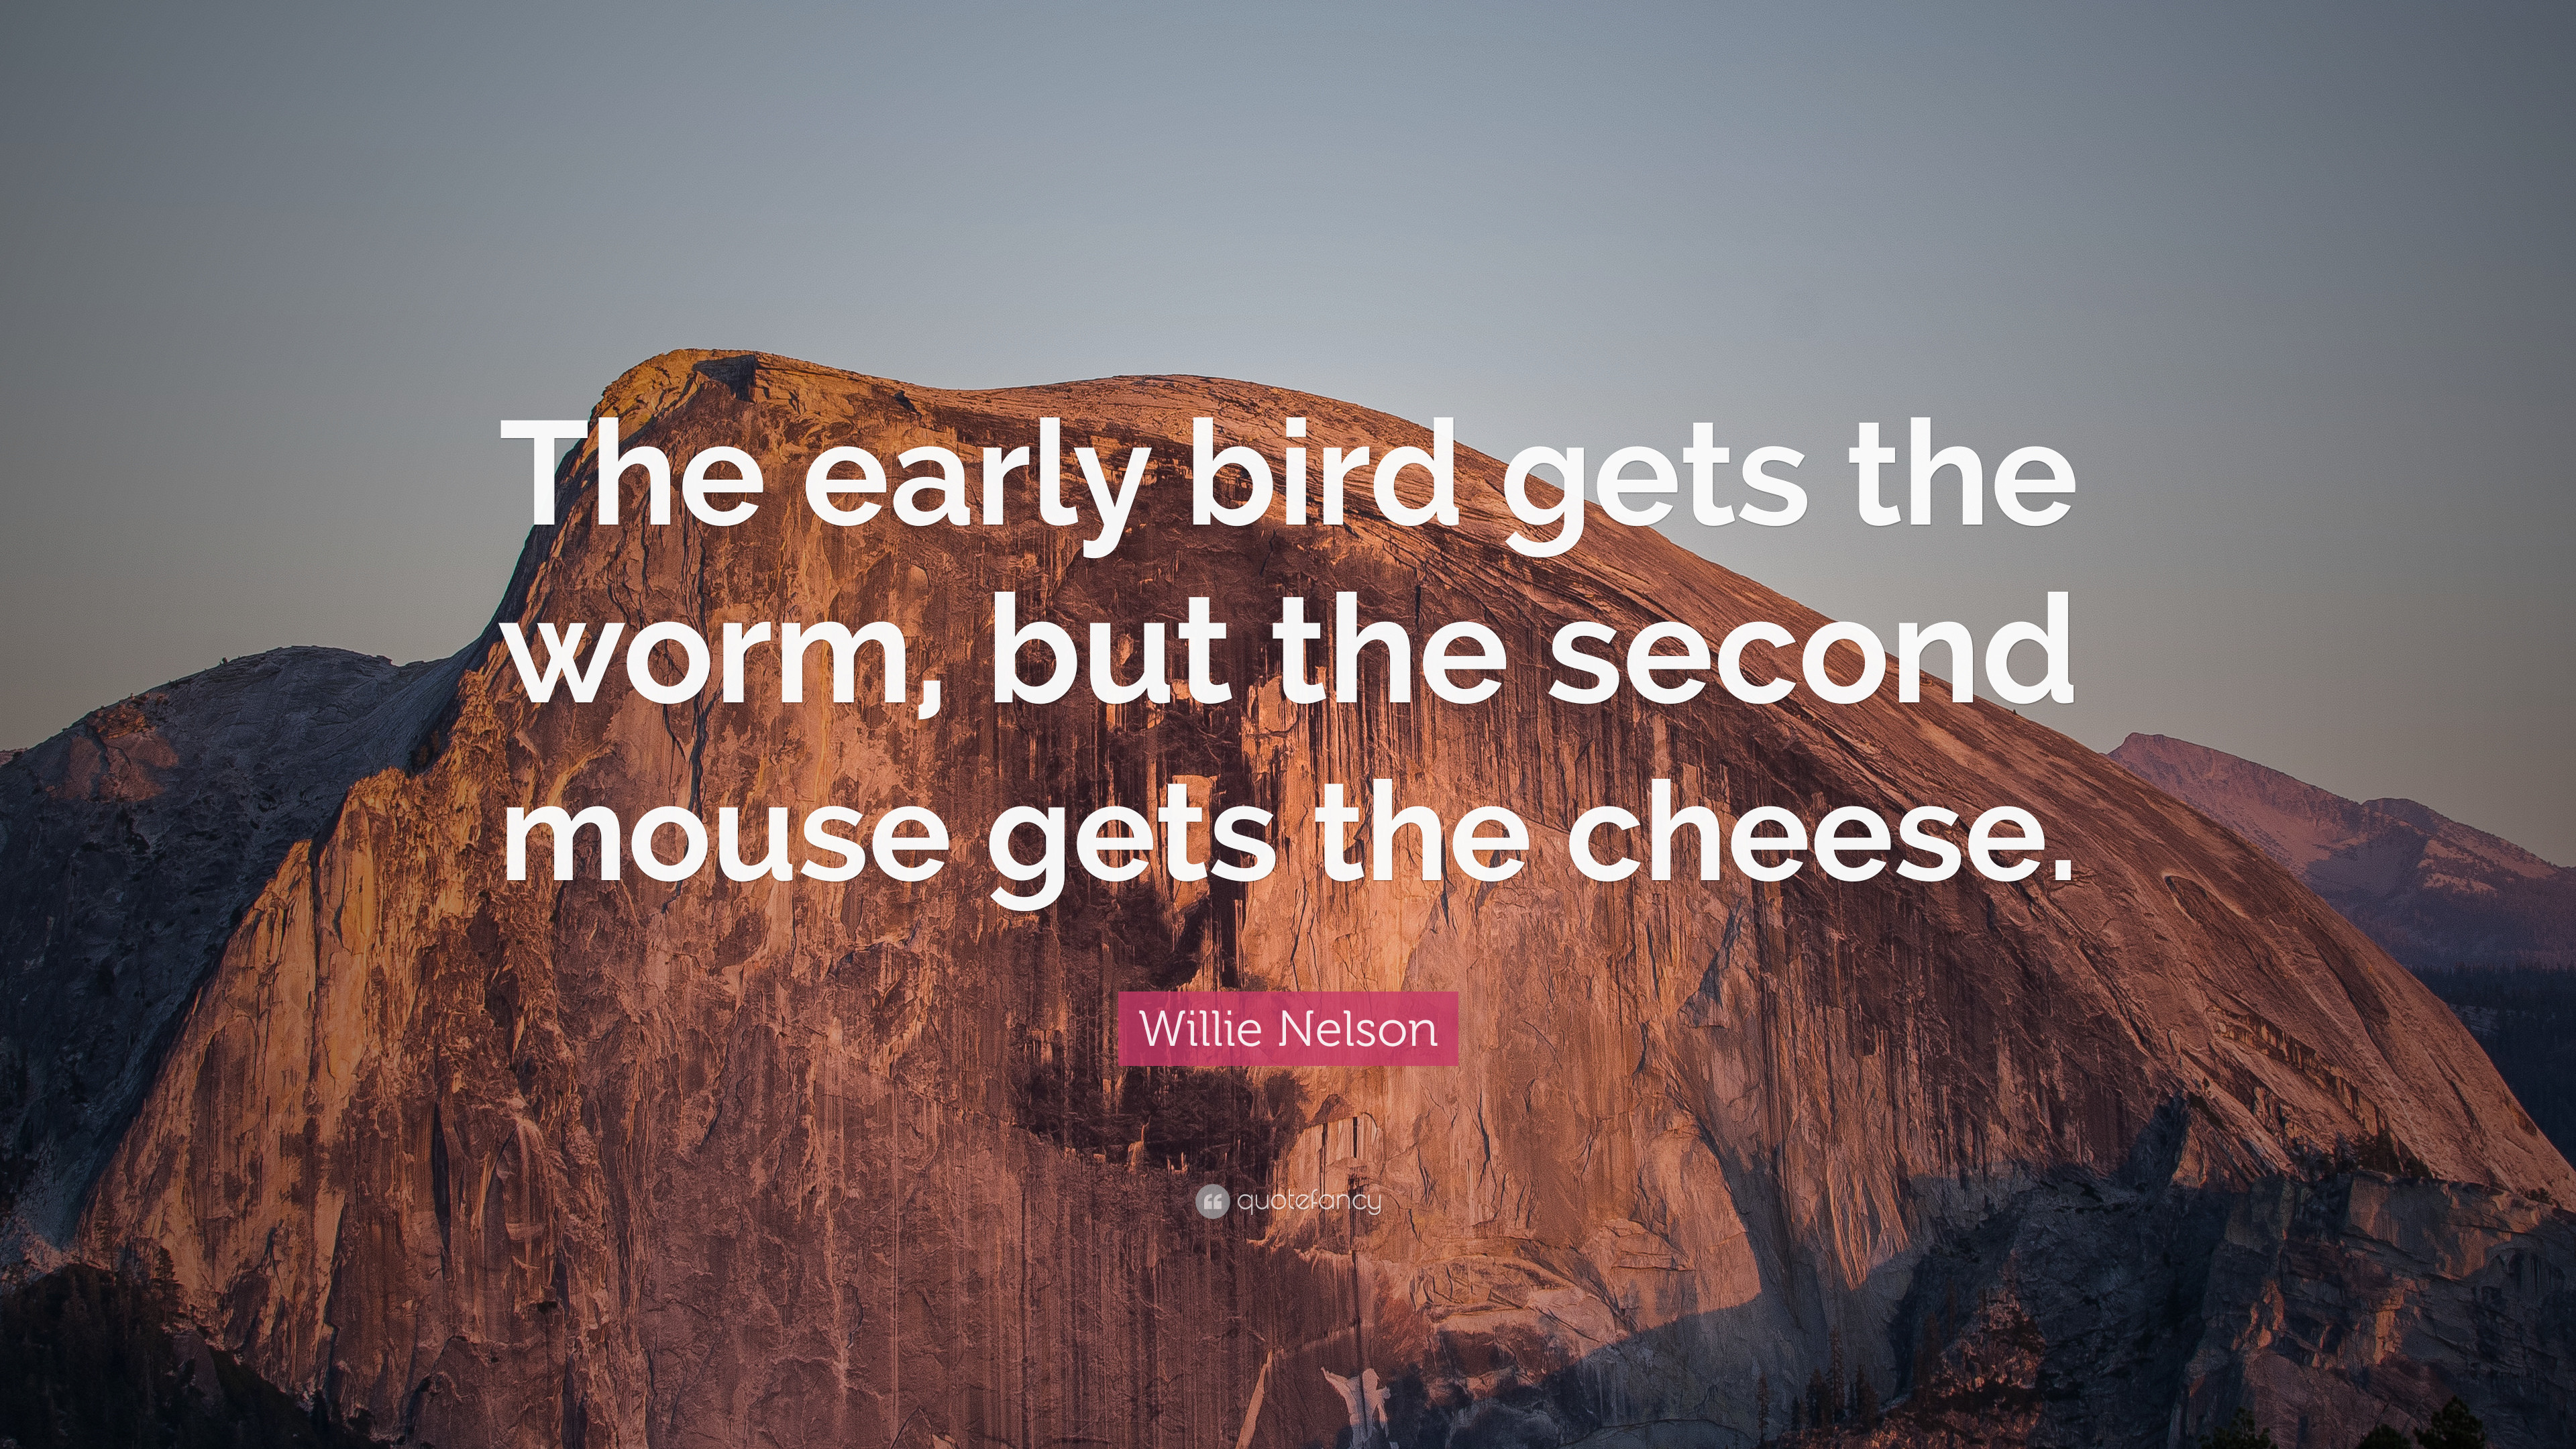 3840x2160 Willie Nelson Quote: “The early bird gets the worm, but the second mouse